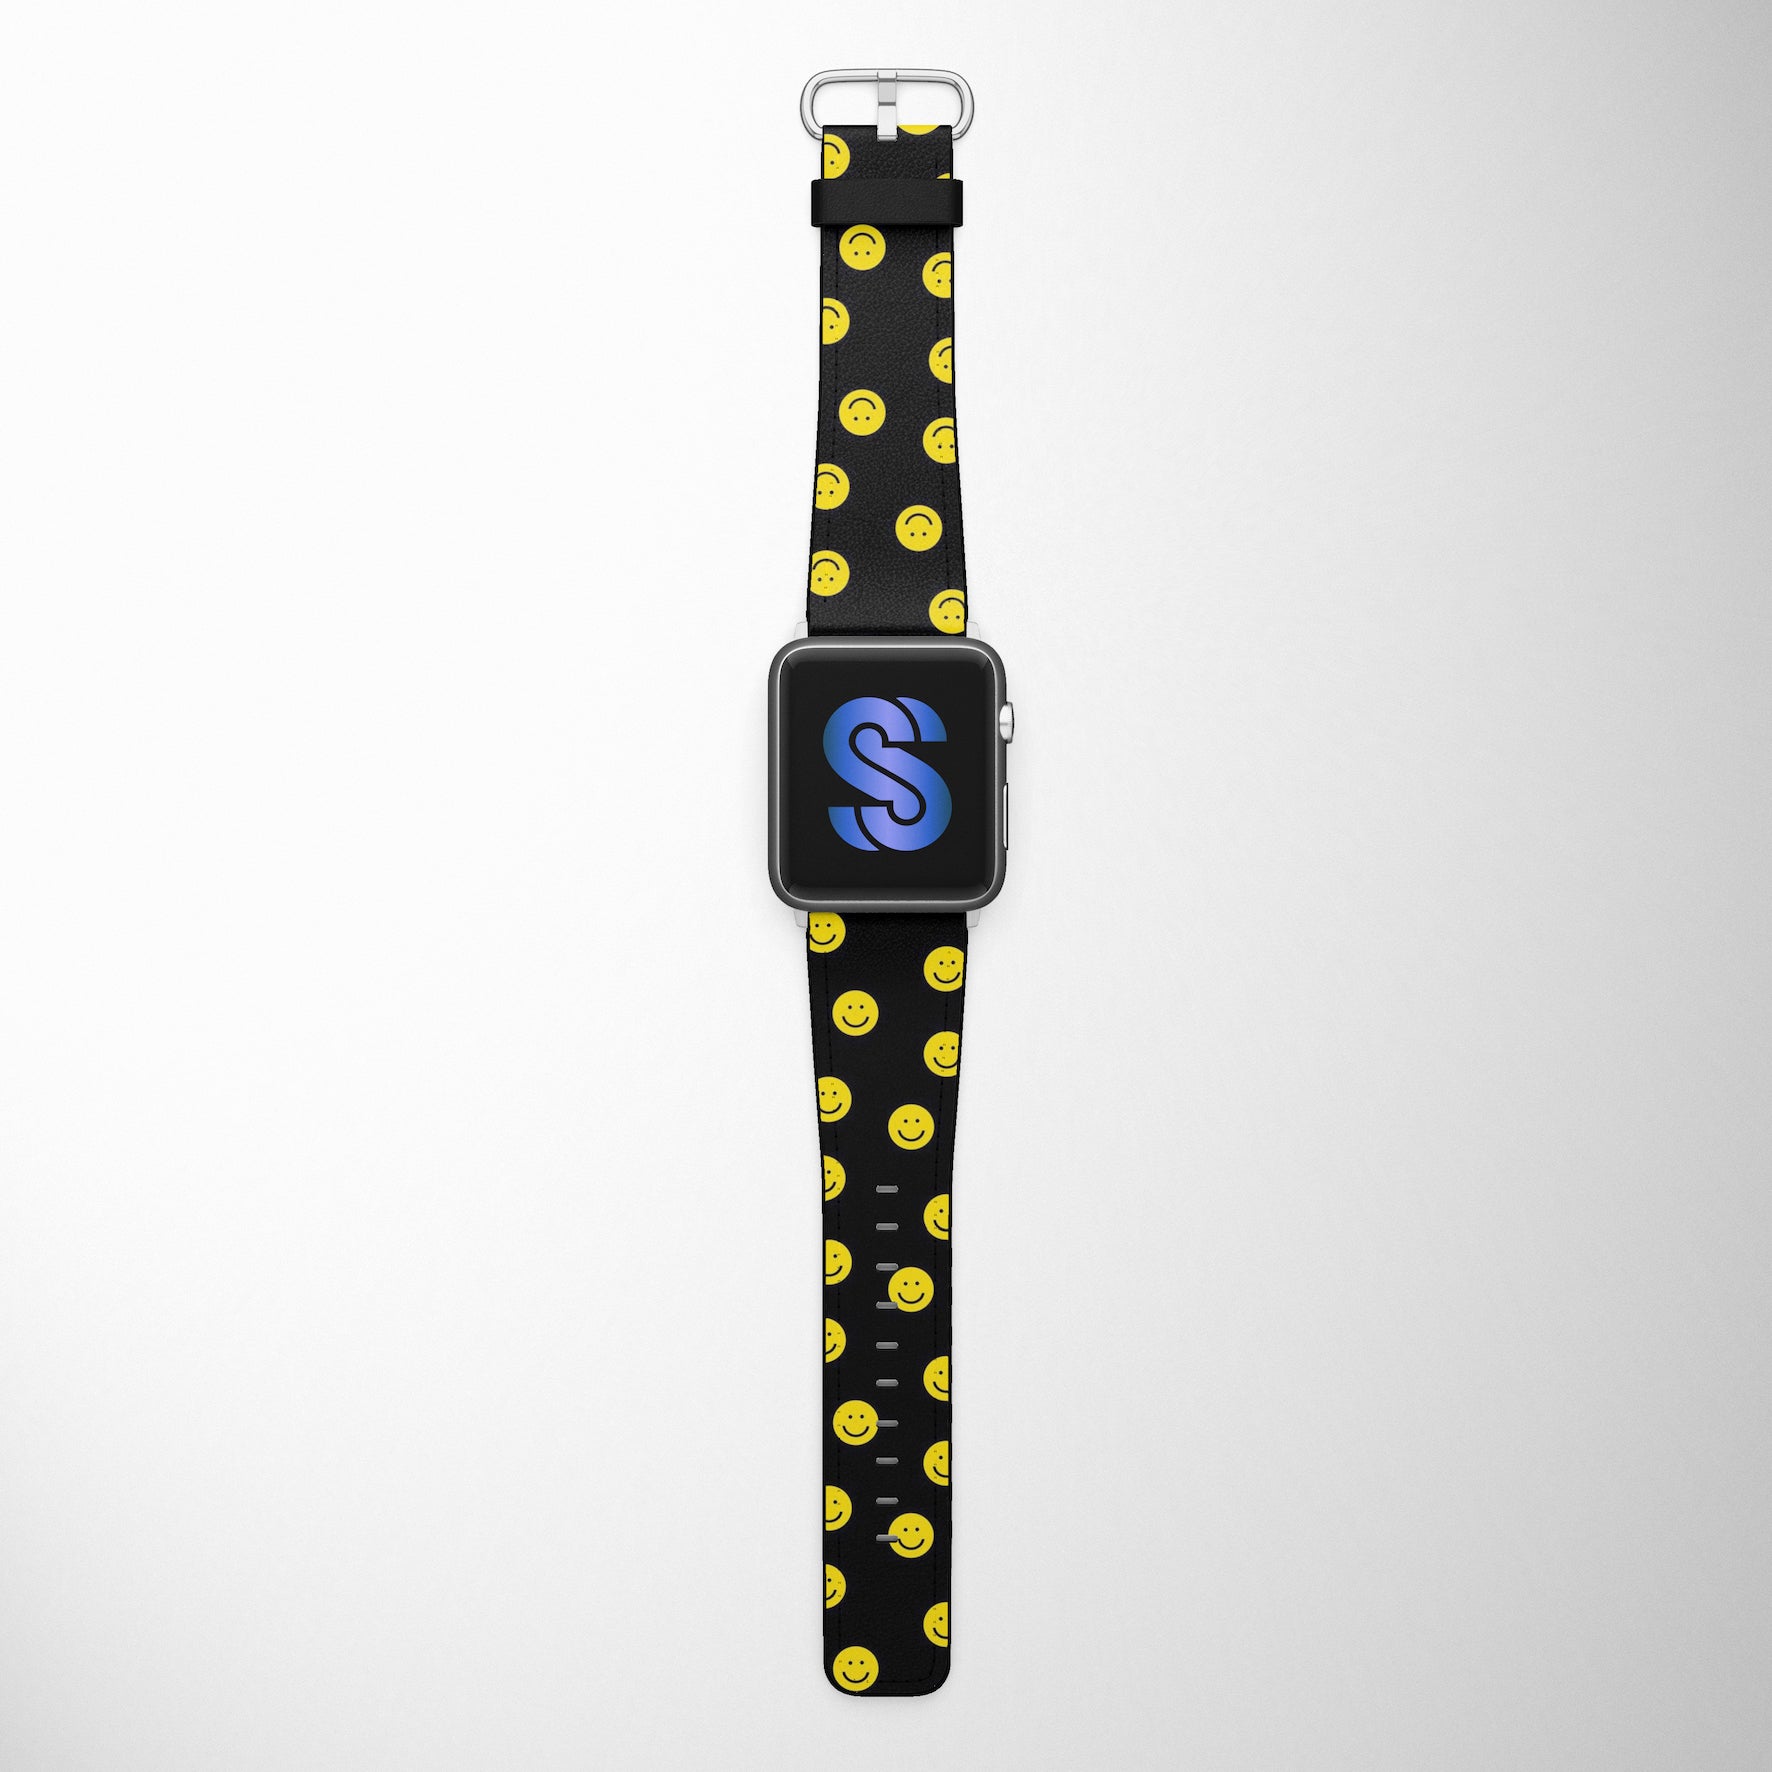 Smileys On Black Faux Leather Apple Watch Band for Apple Watch 1,2,3,4,5,6,SE - www.scottsy.com